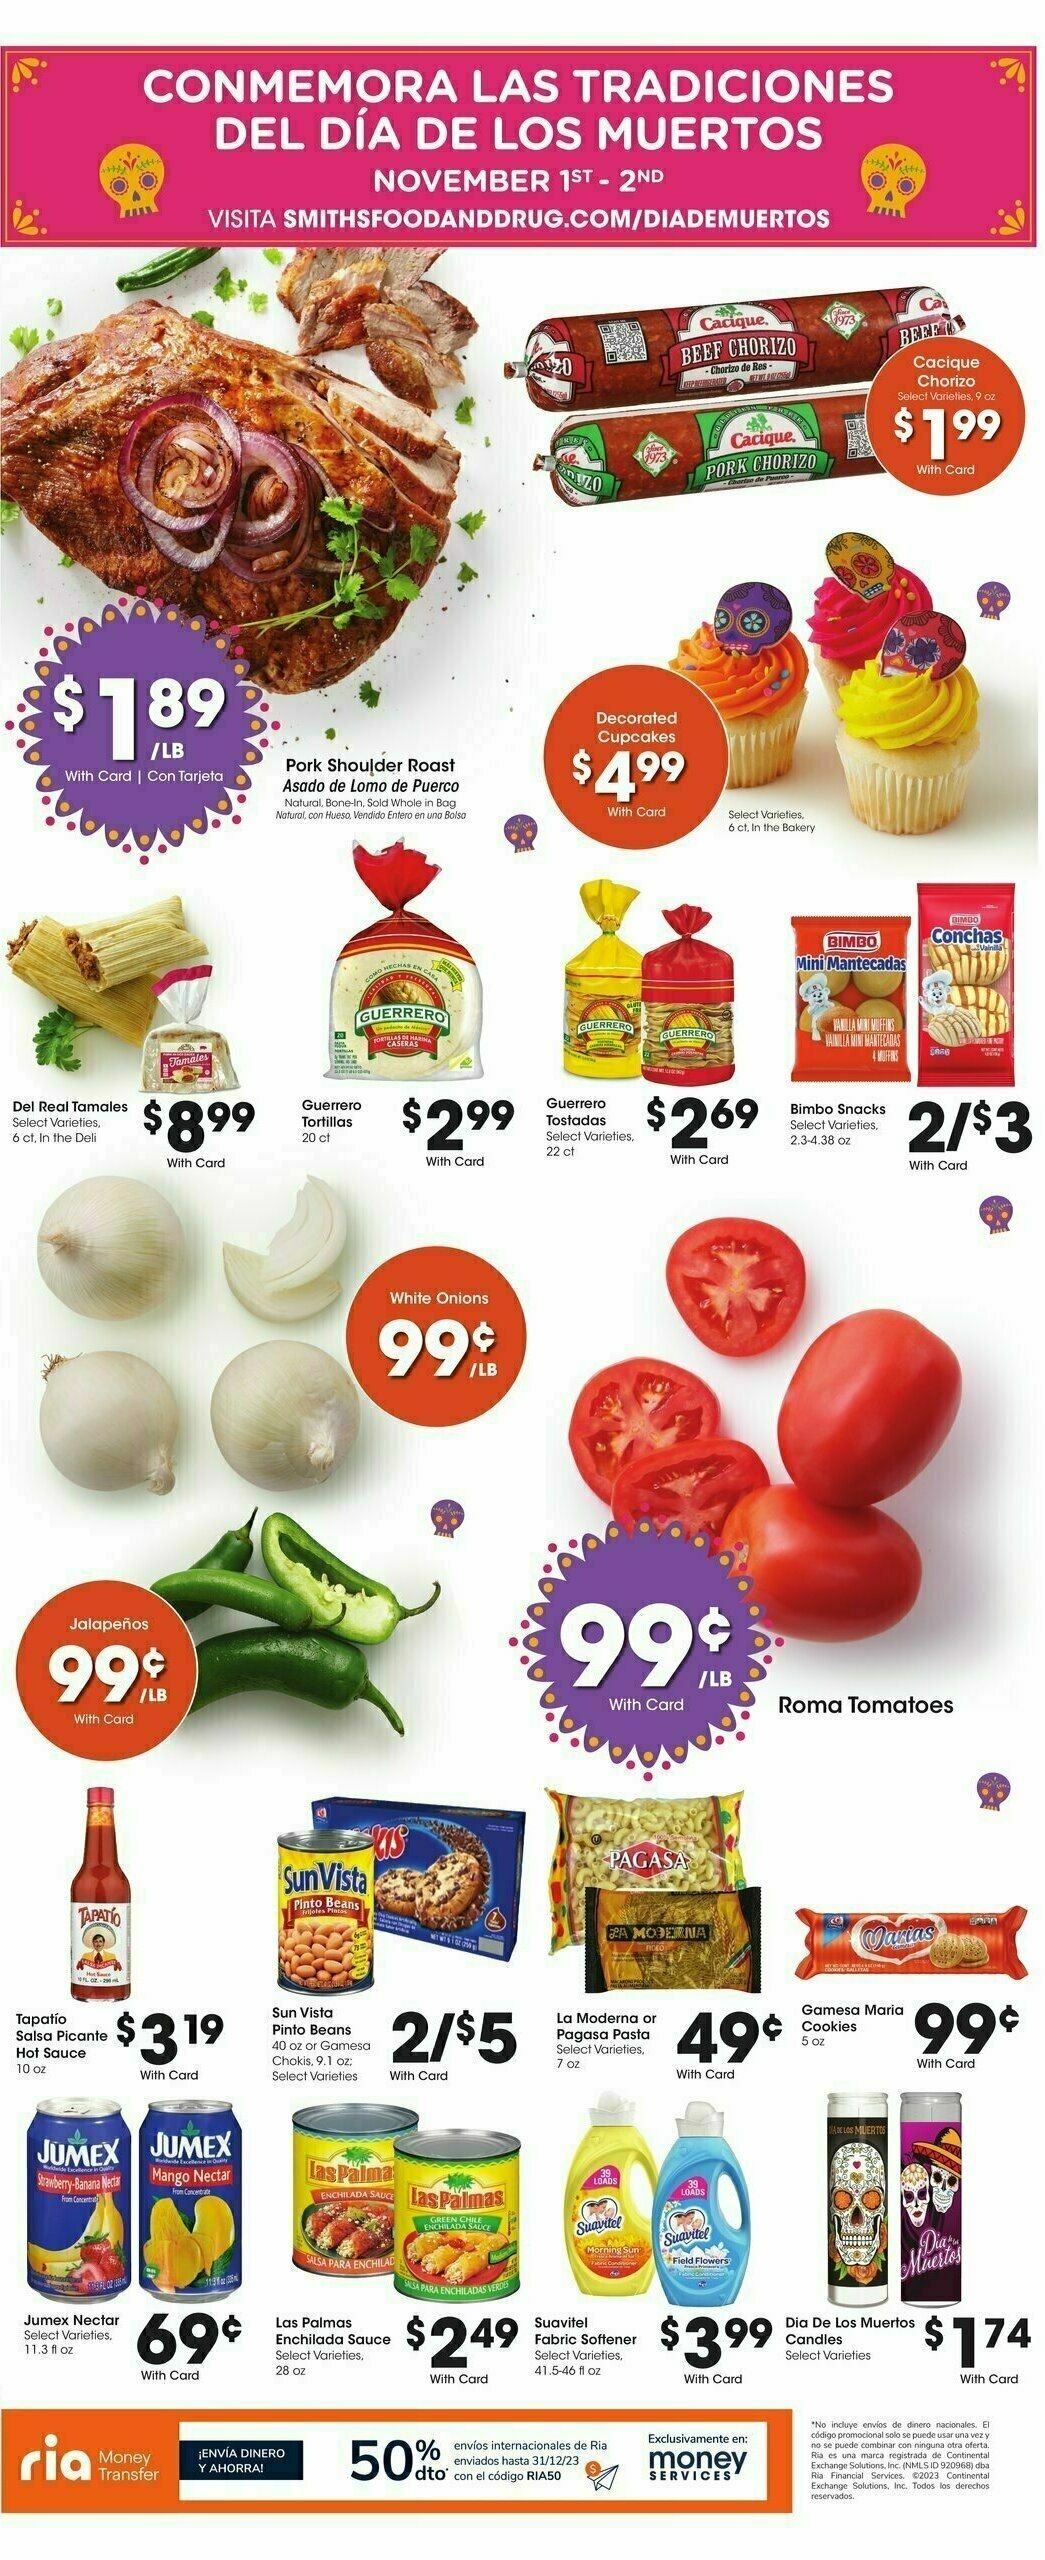 Smith's Weekly Ad from October 25